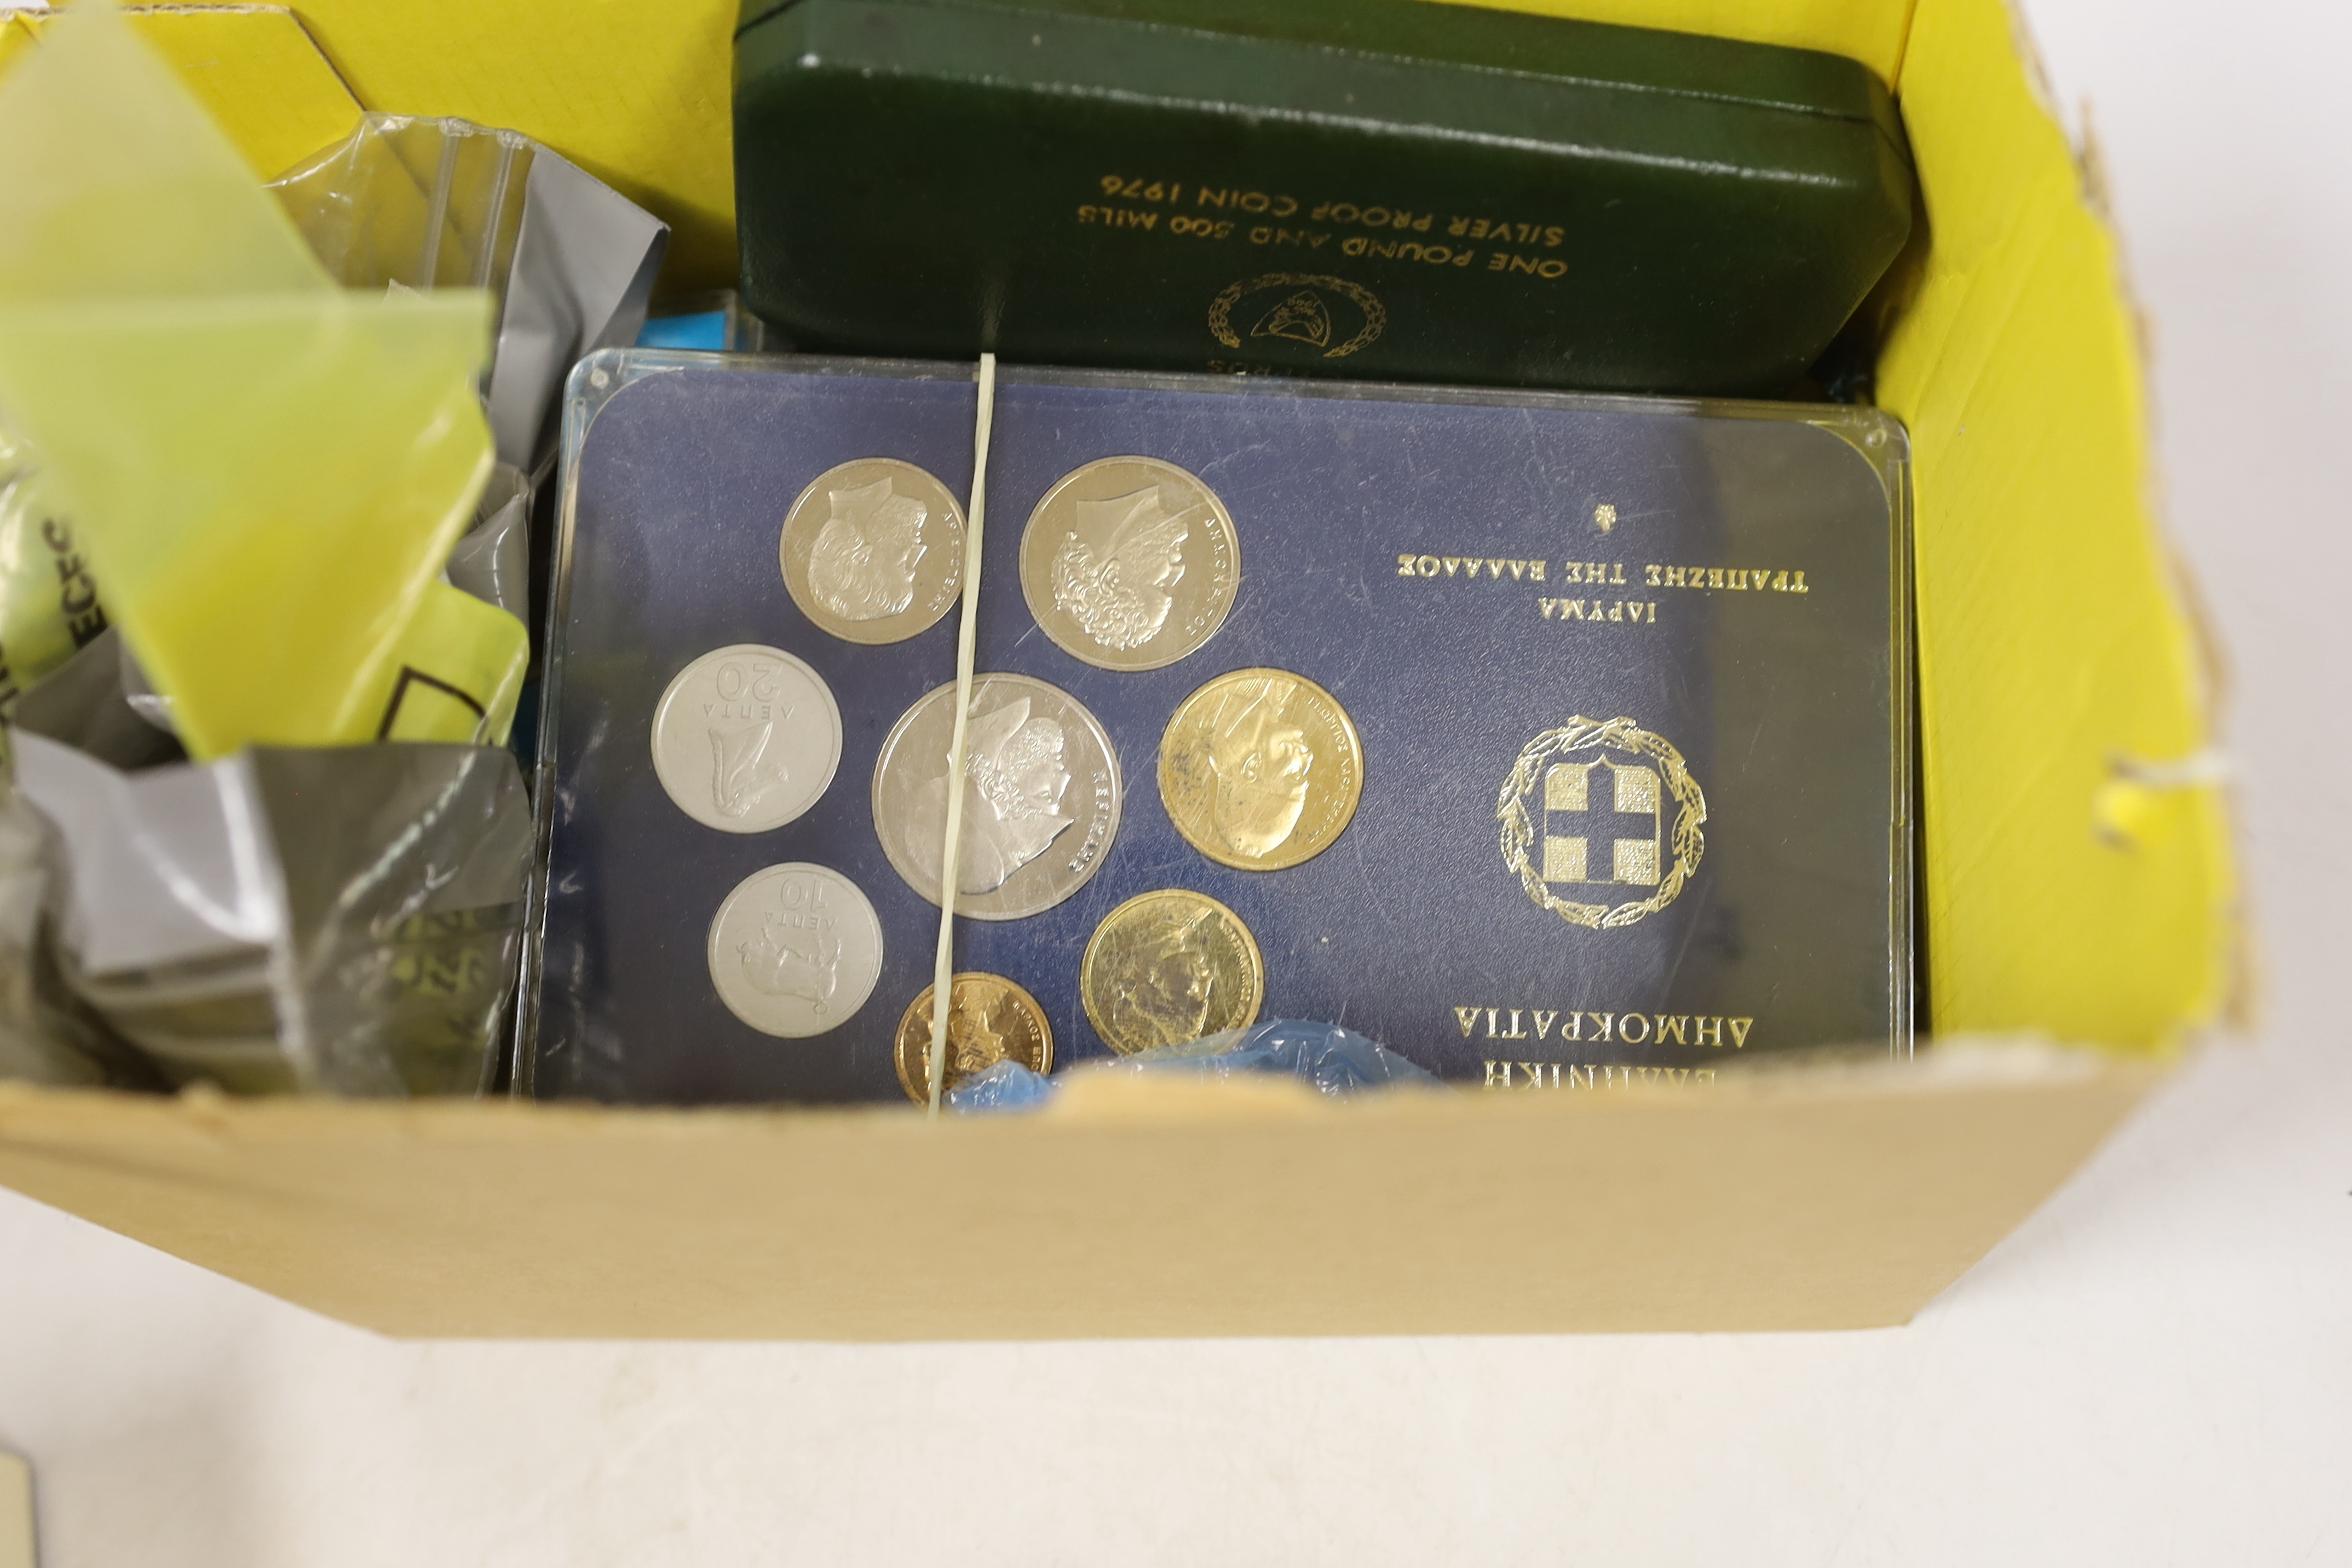 British and world coins, including Cyprus forty five piastres 1928, about EF, Cyprus silver proof £1 and 500 mils coins, 1976, UK commemorative coins and medals, US, Greece, etc..